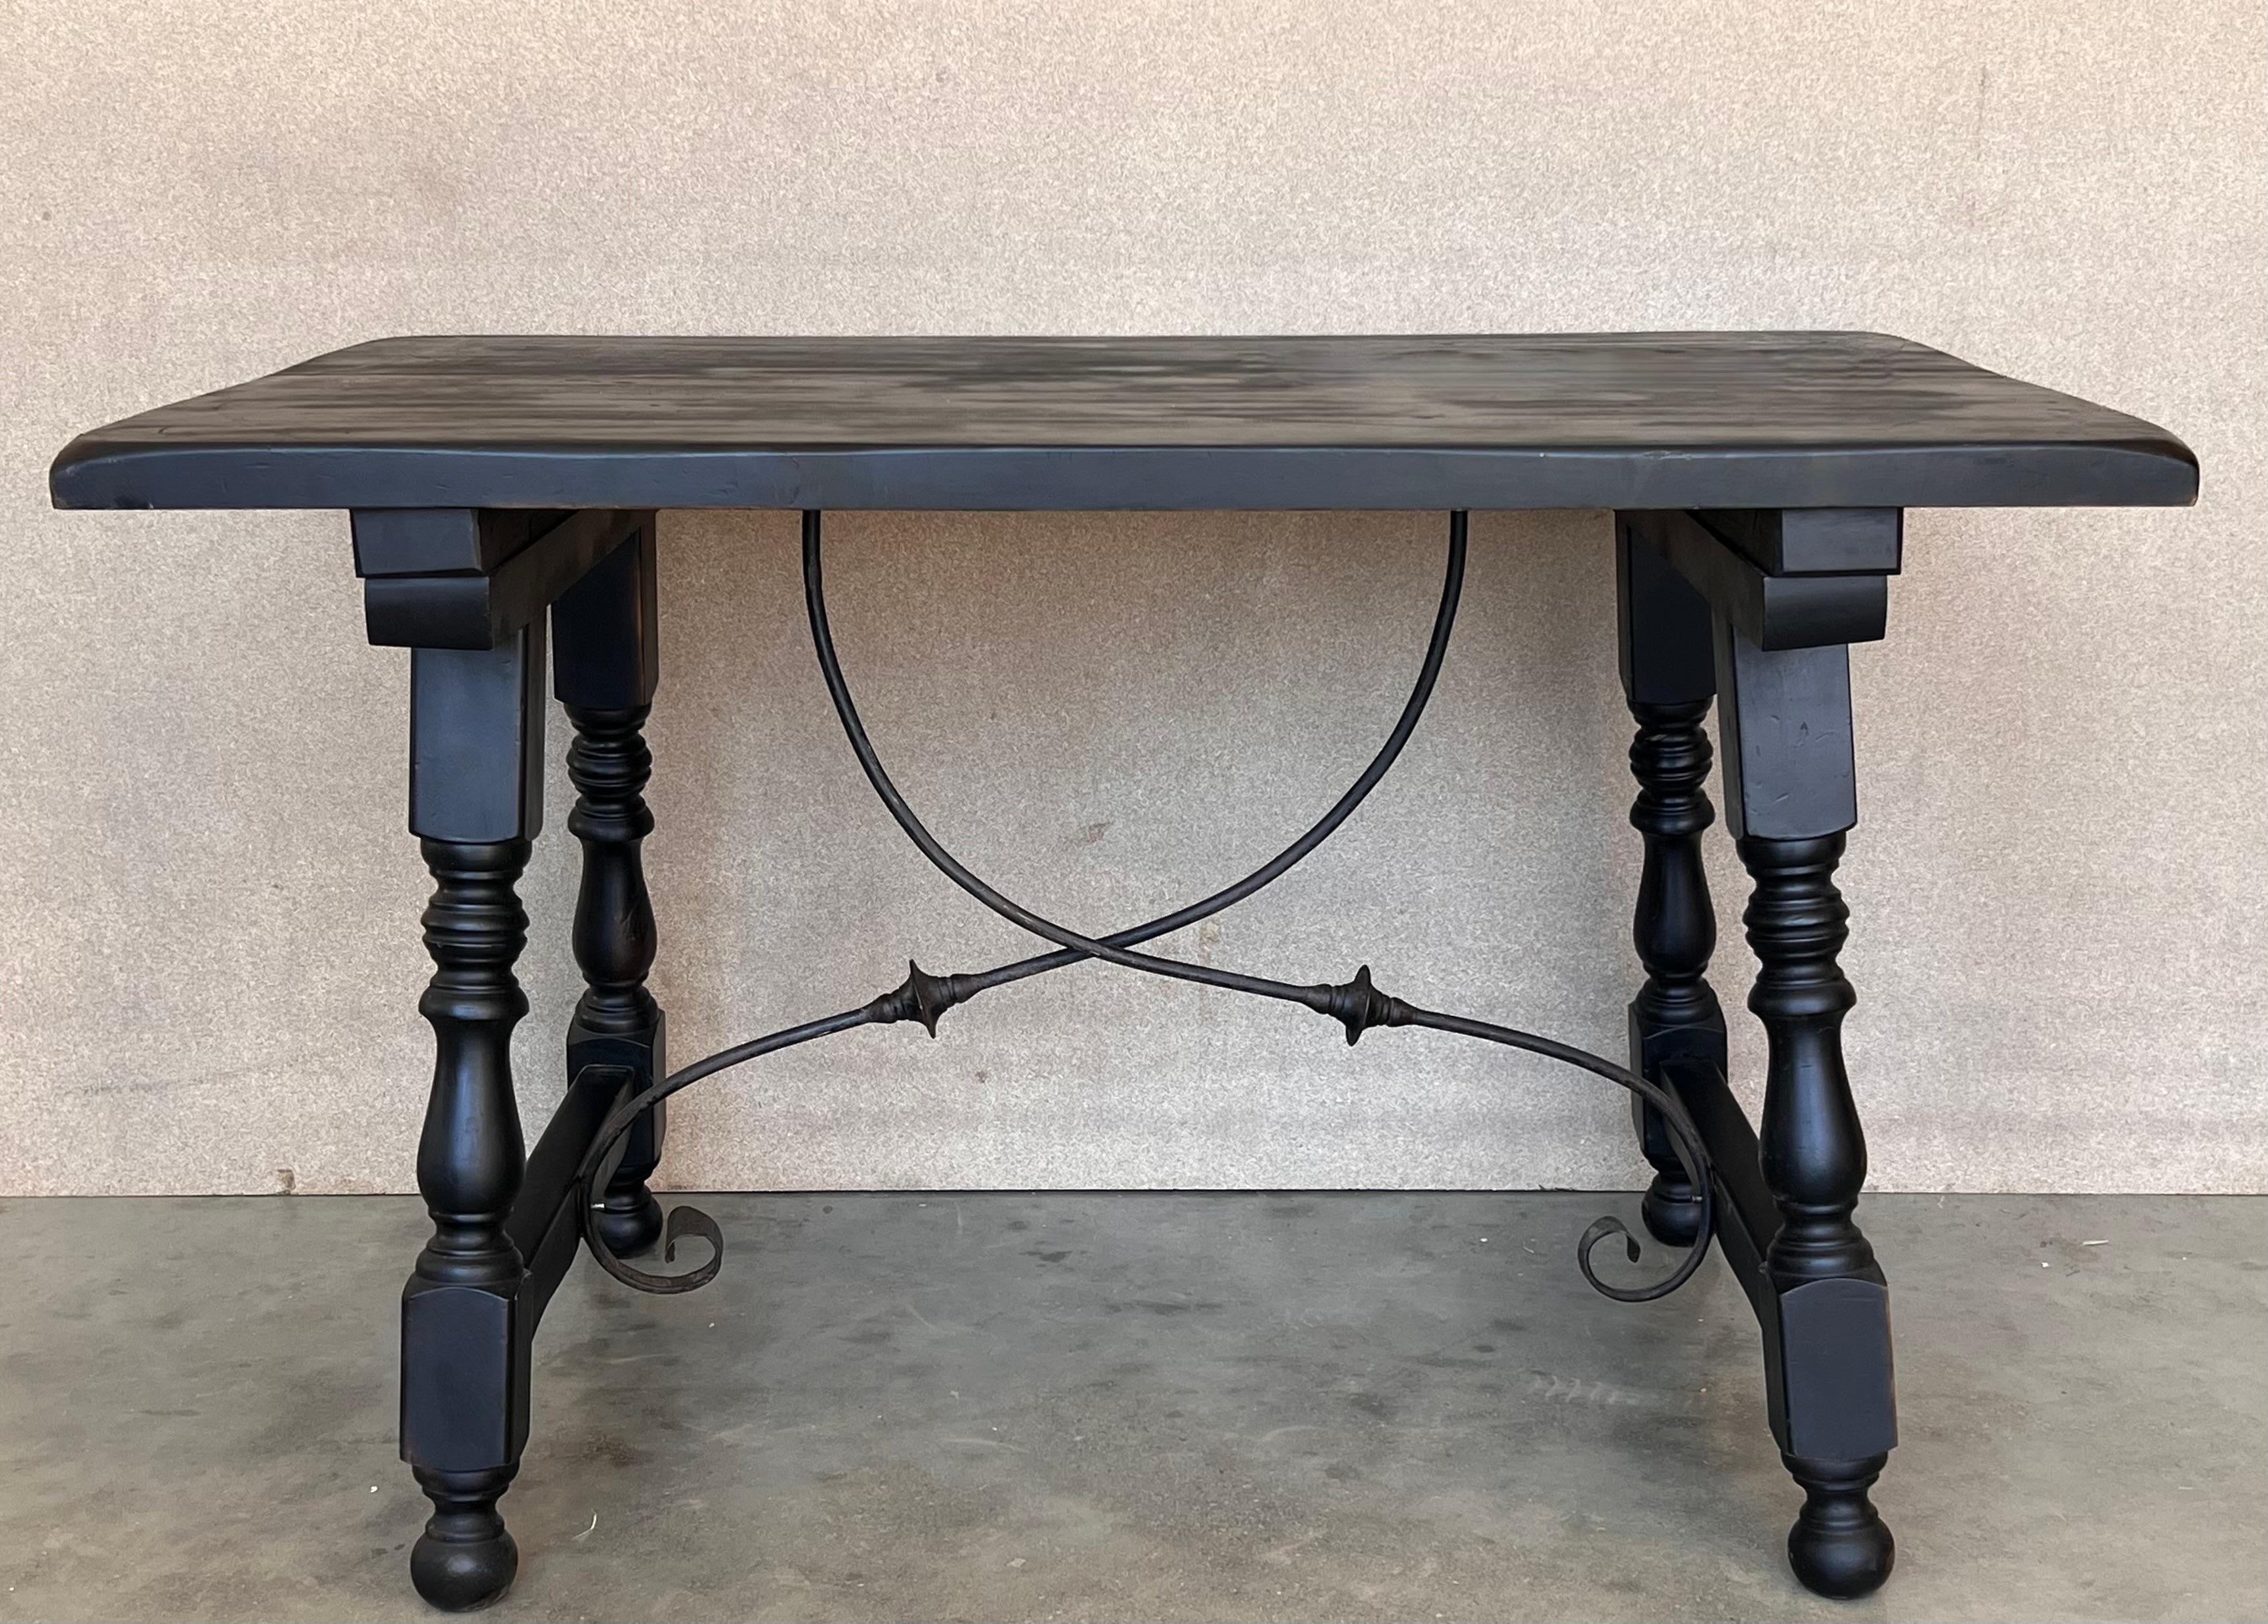 A Spanish Fratino dining table with hand made wrought-iron stretcher from the late 19th century. This Spanish wooden table features a sturdy rectangular top sitting above an exquisite base made of splayed carved legs connected to one another with a